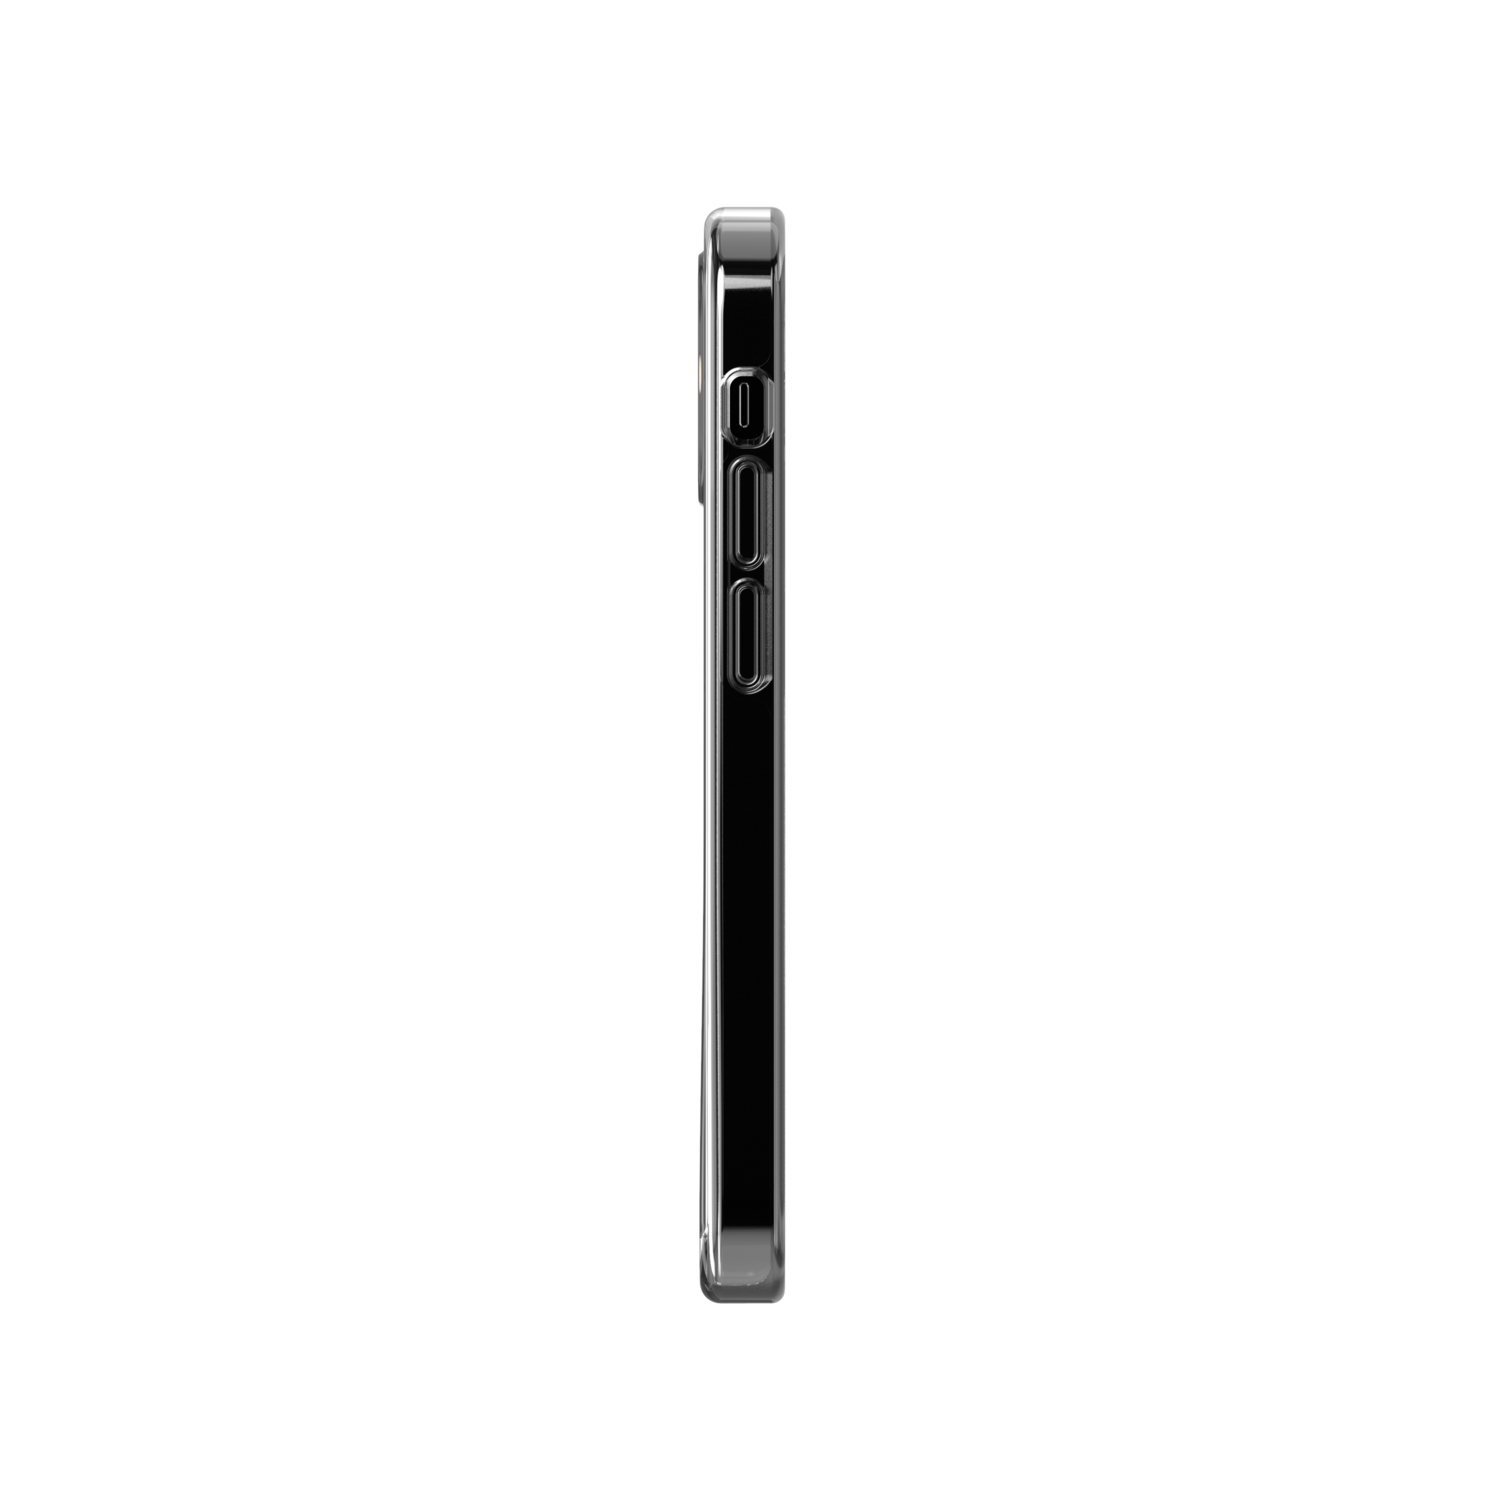 iPhone12MiniAspectClear-SIDE-1.png